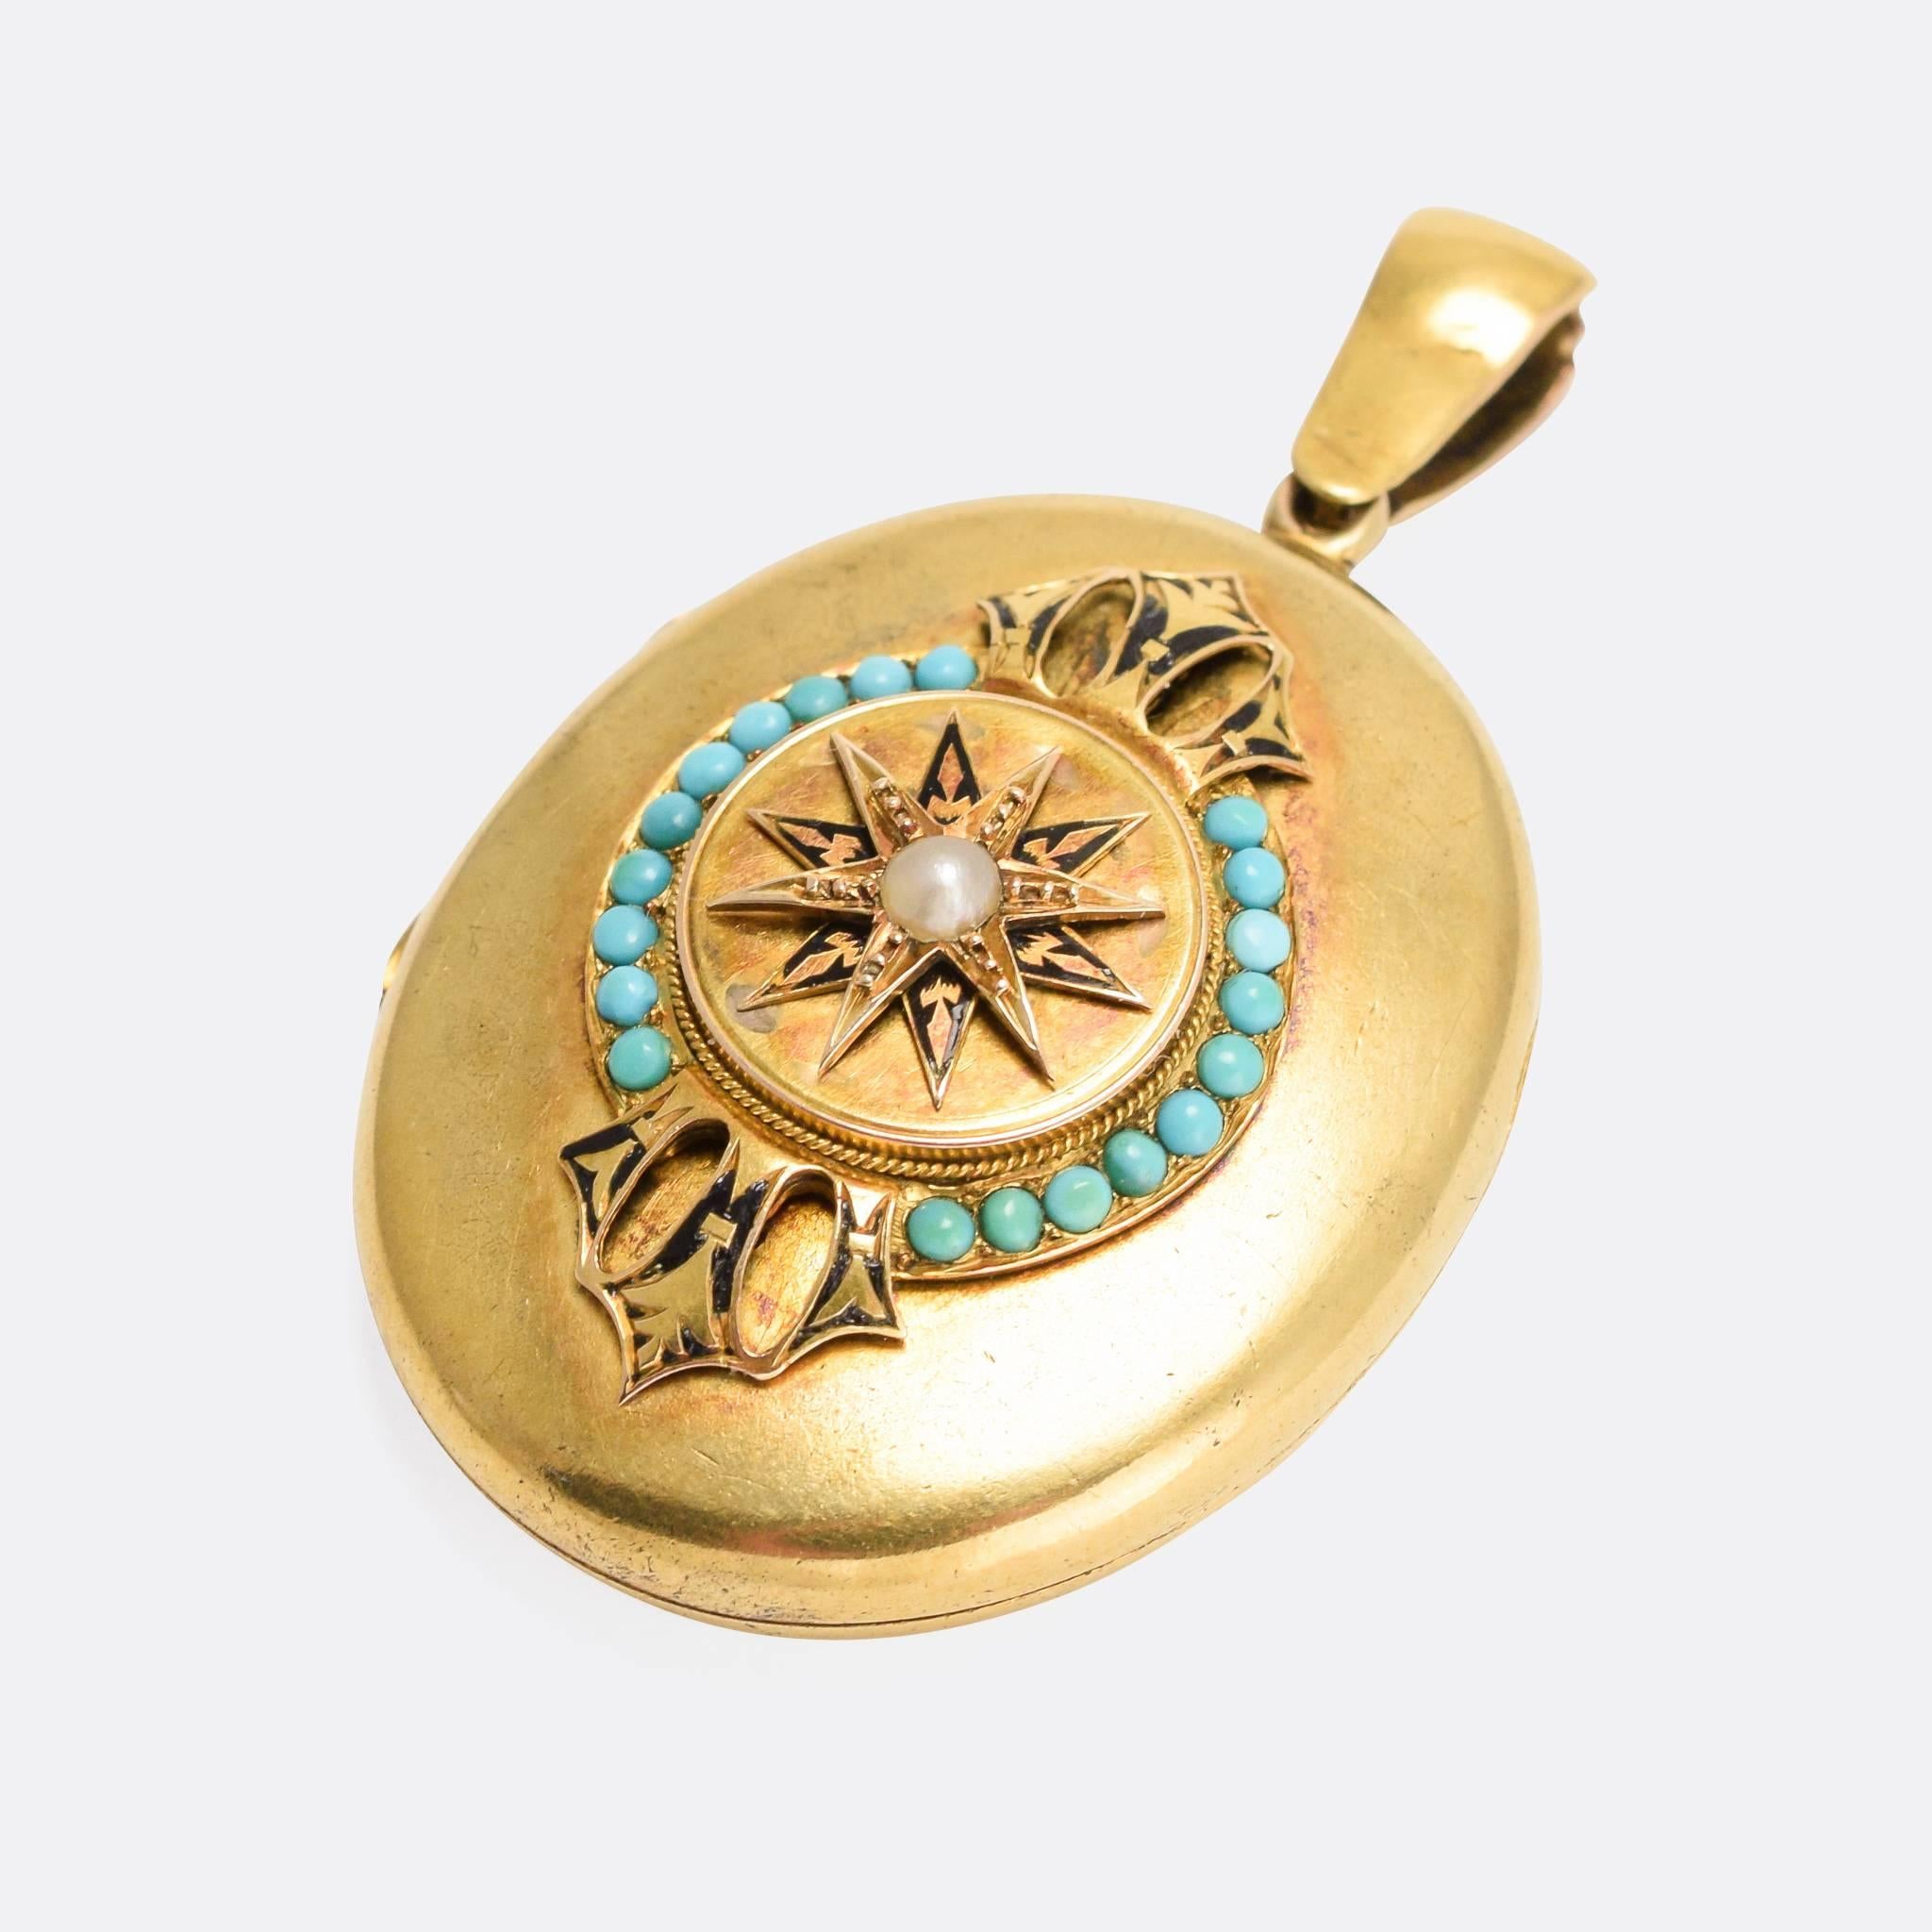 A superb antique oval locket set with pearls and turquoise cabochons. It's modelled in rich 15 karat gold, with an applied star design to the front that's finished in black enamel and Etruscan style ropework details. A beautiful mid-Victorian piece,